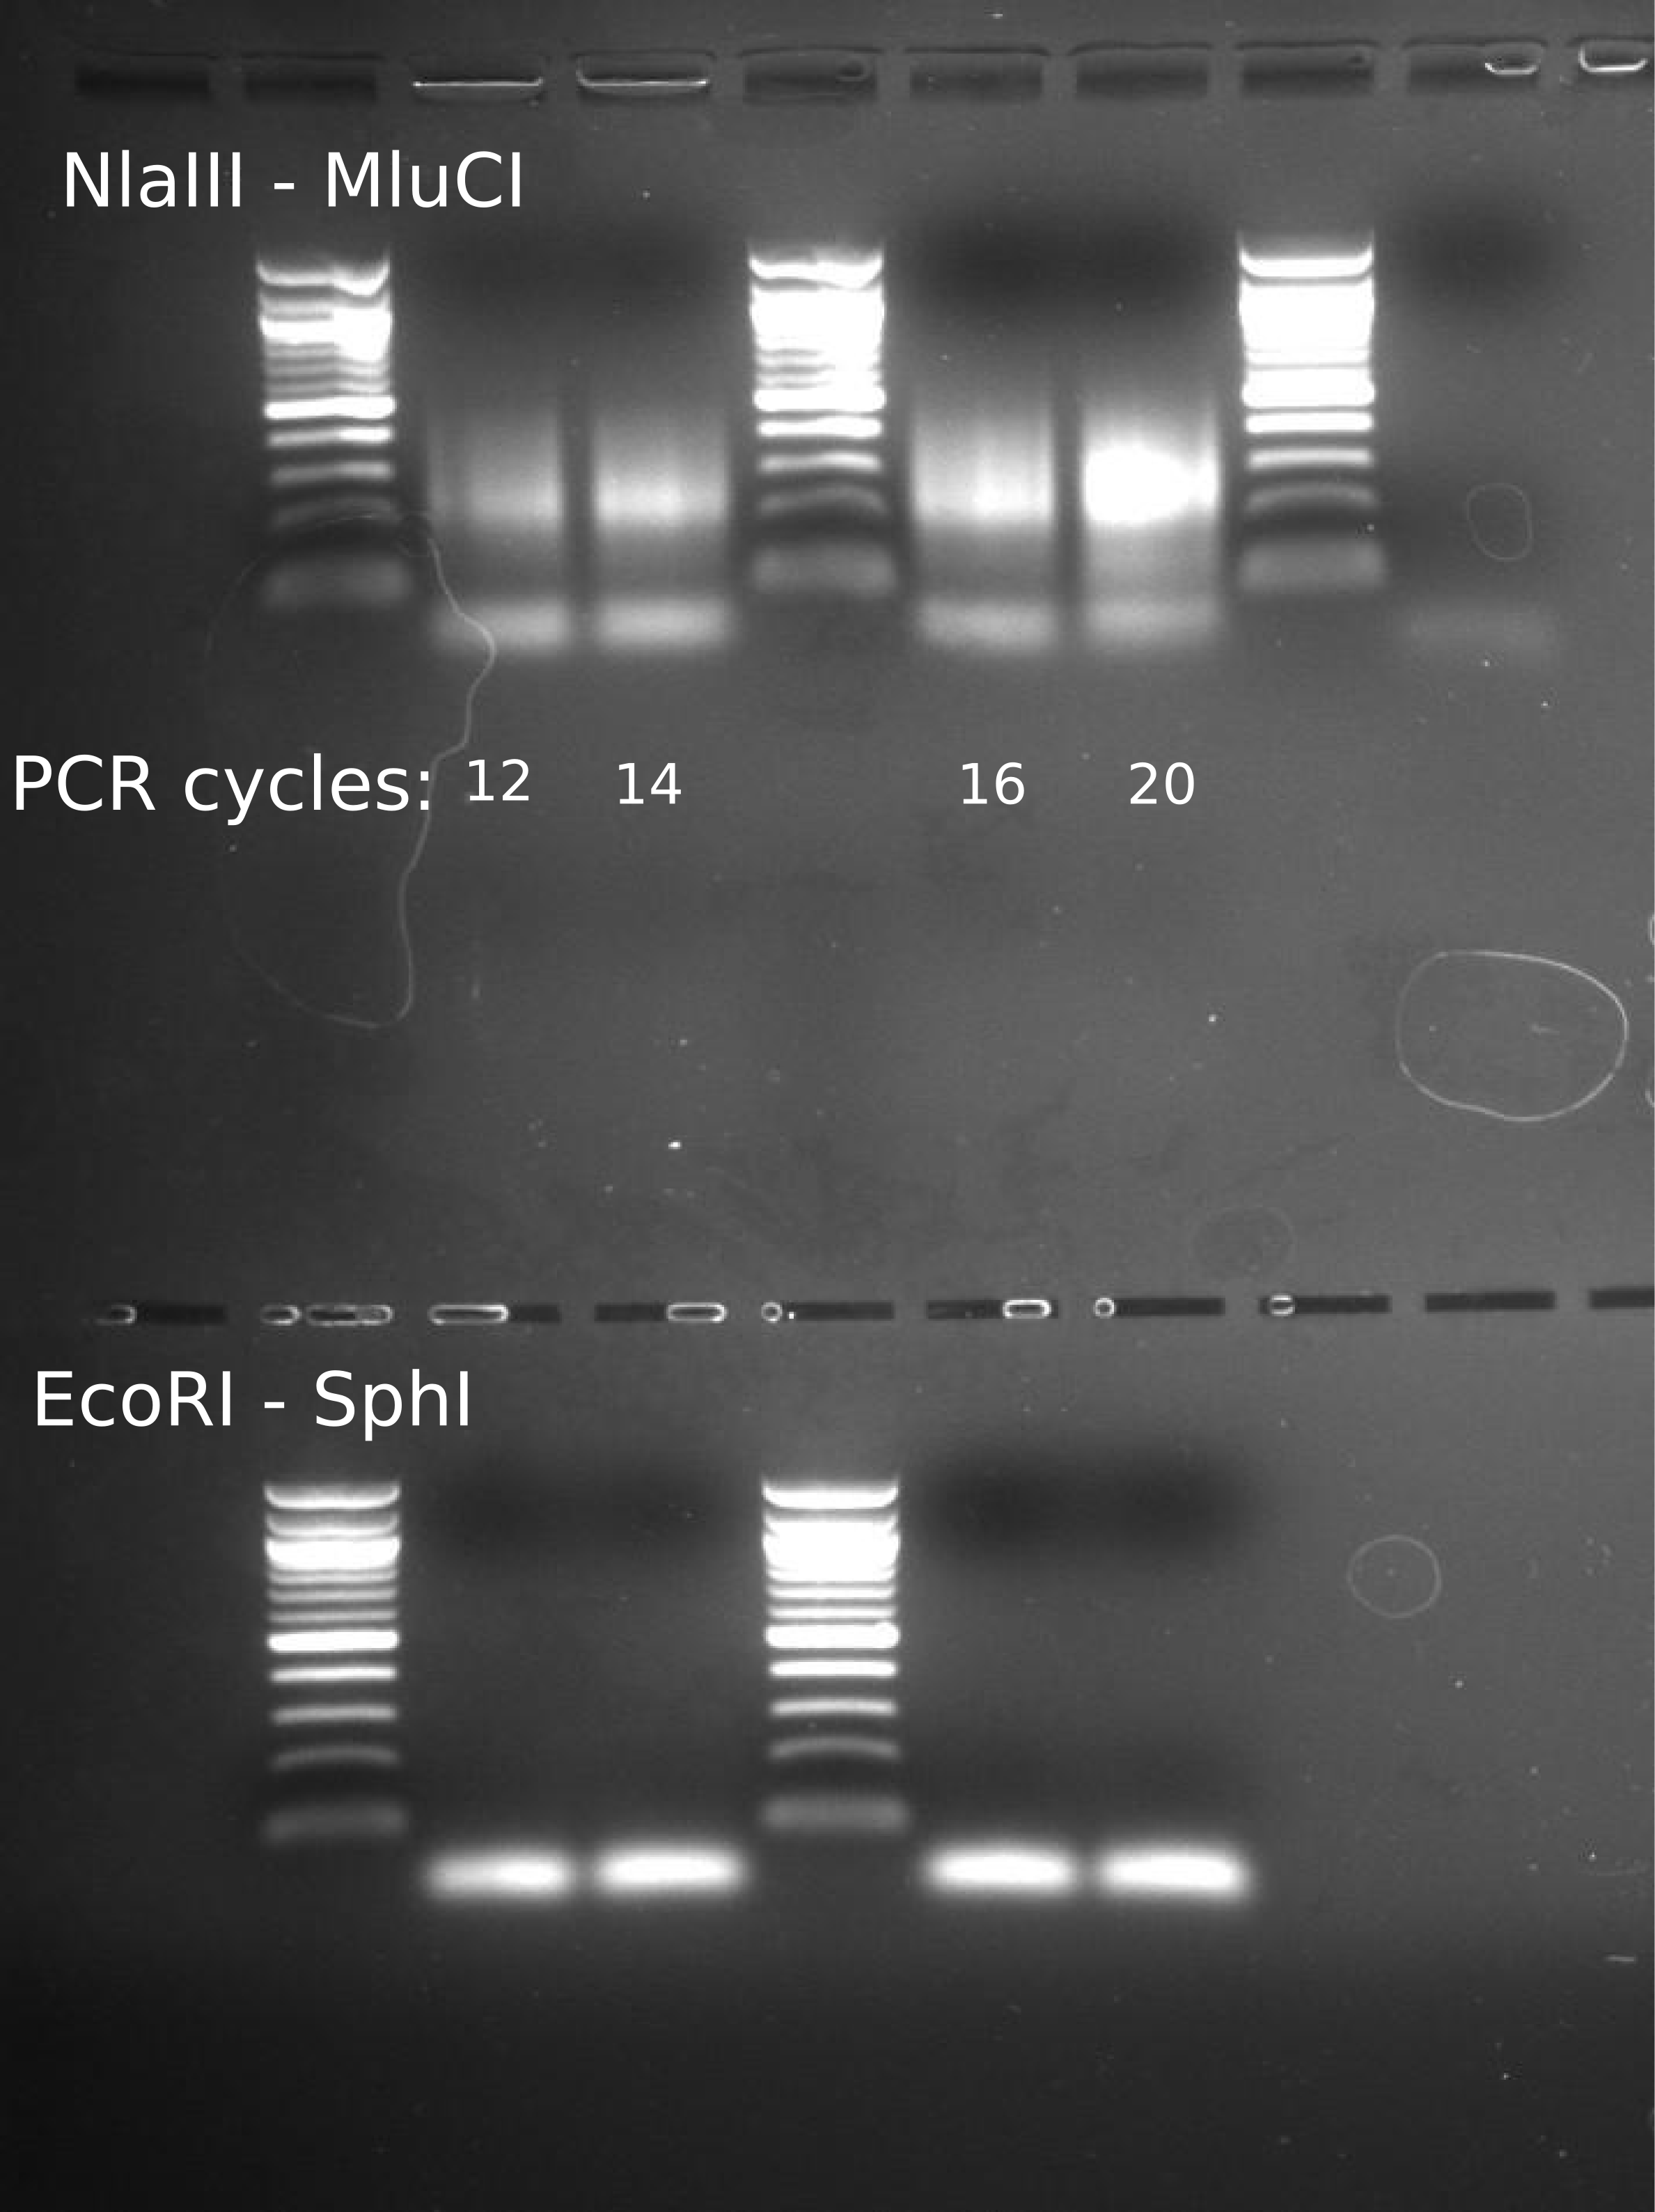 Gel image of PCR titration of pooled DNA fragments for ddRADseq. Top row contains samples from NlaIII - MluCI double digestion. Bottom row contains samples from EcoRI - SPhI double digestion. Wells are (1) 100 bp ladder (2) 12 cycles (3) 14 cycles (4) 100 bp ladder (5) 16 cycles (6) 20 cycles (7) 100 bp ladder.